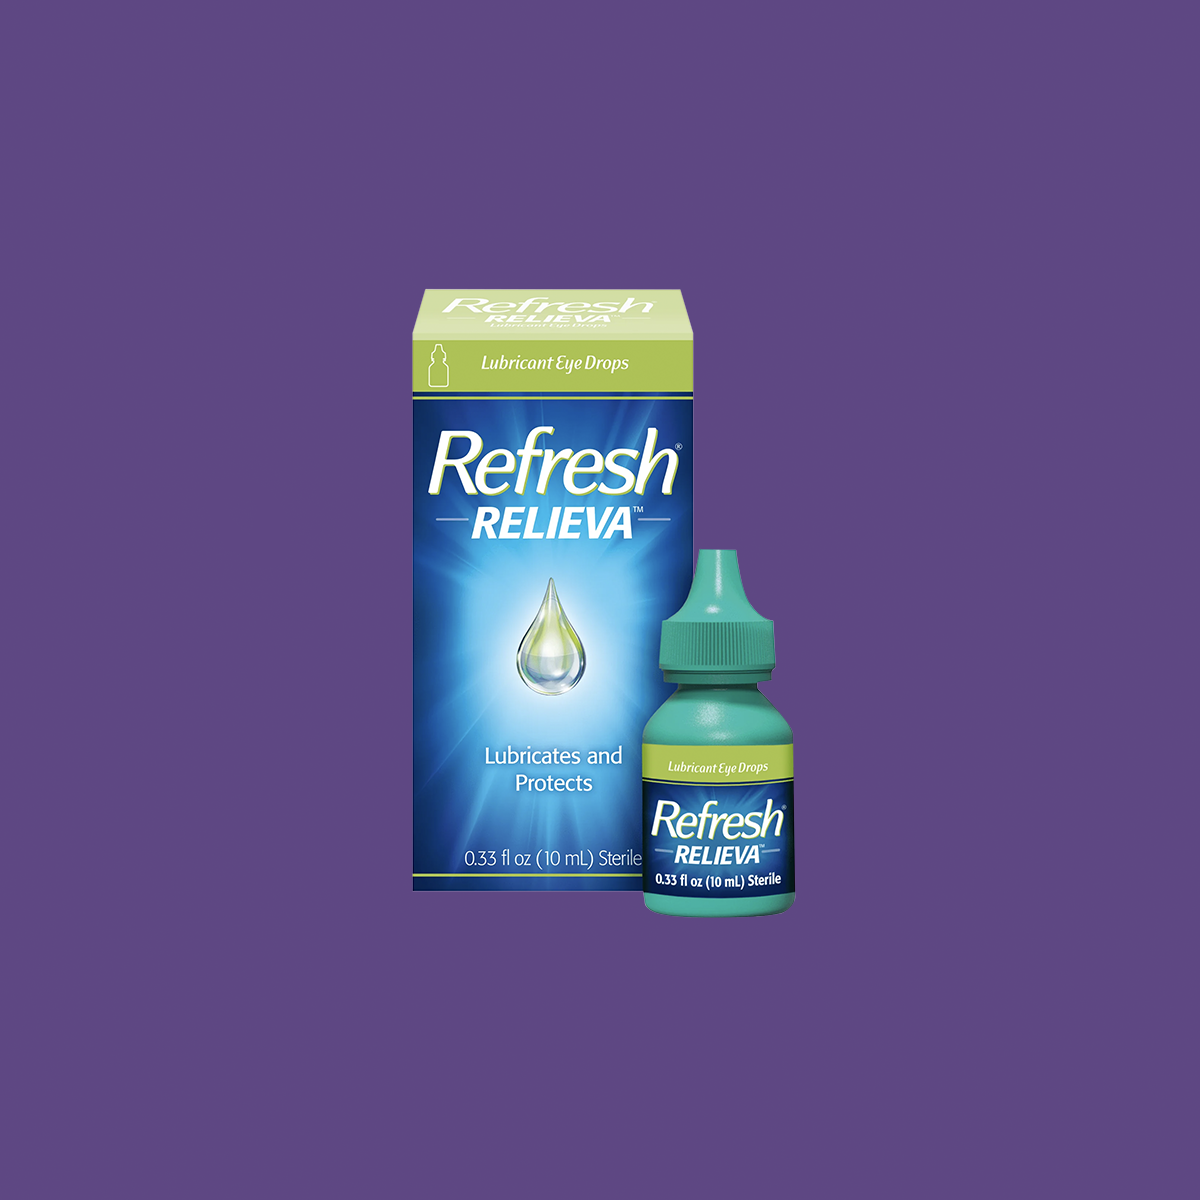 Refresh Relieva Eye Drops to relieve discomfort due to dry, irritated eyes (10mL)